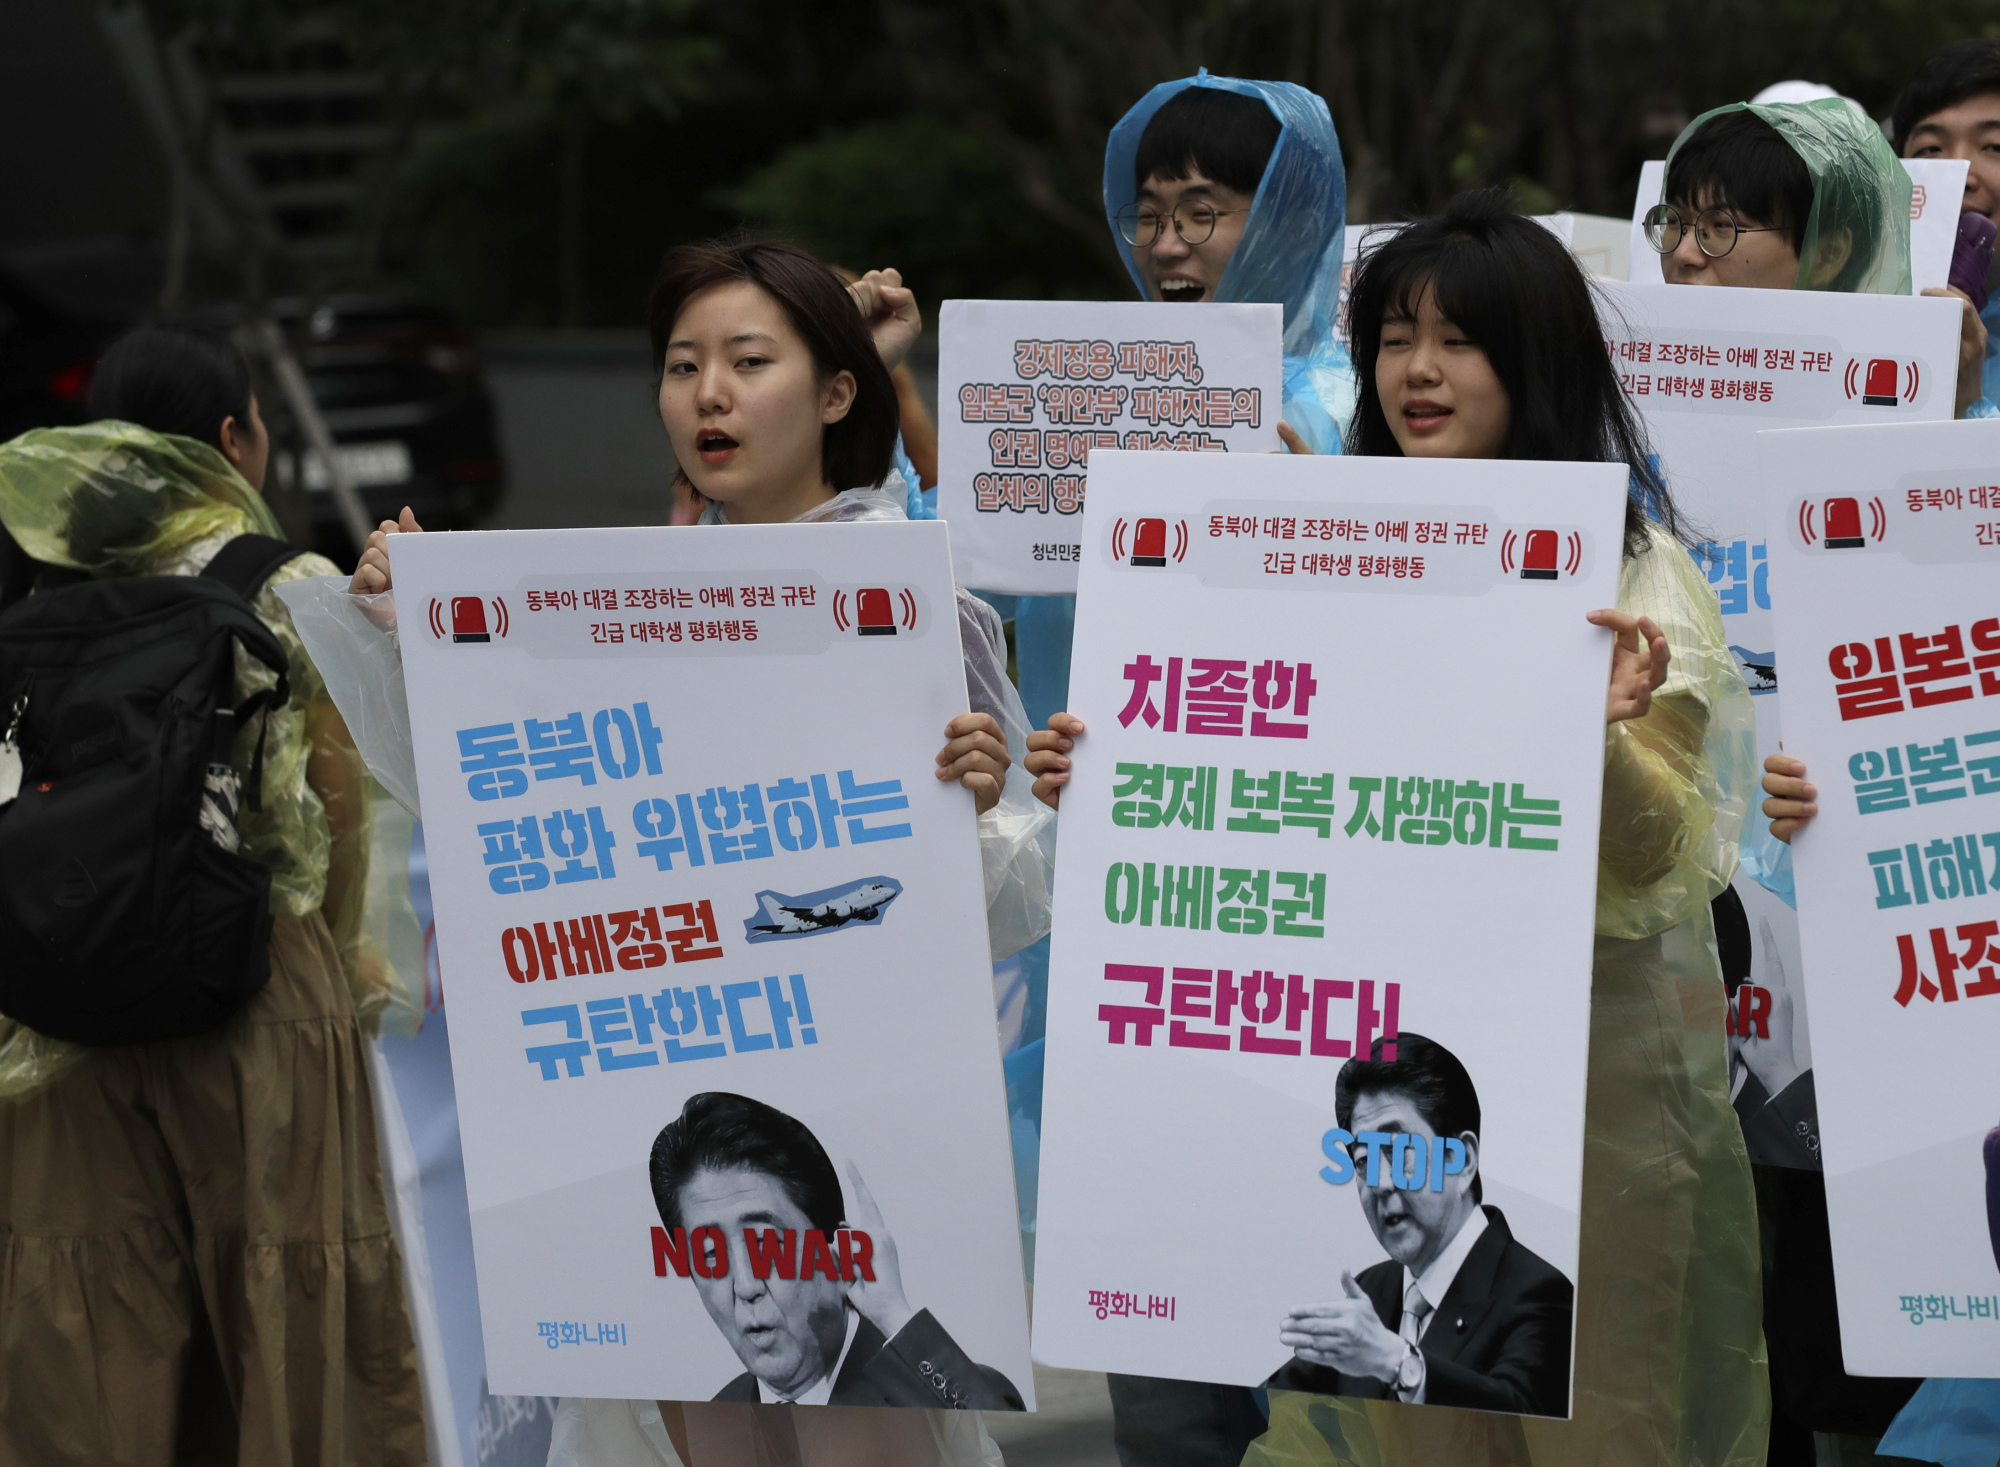 South Korean students shout slogans as they march to denounce the Japanese government's decision to impose some restrictions on exports, near the Japanese Embassy in Seoul on Wednesday. | AP